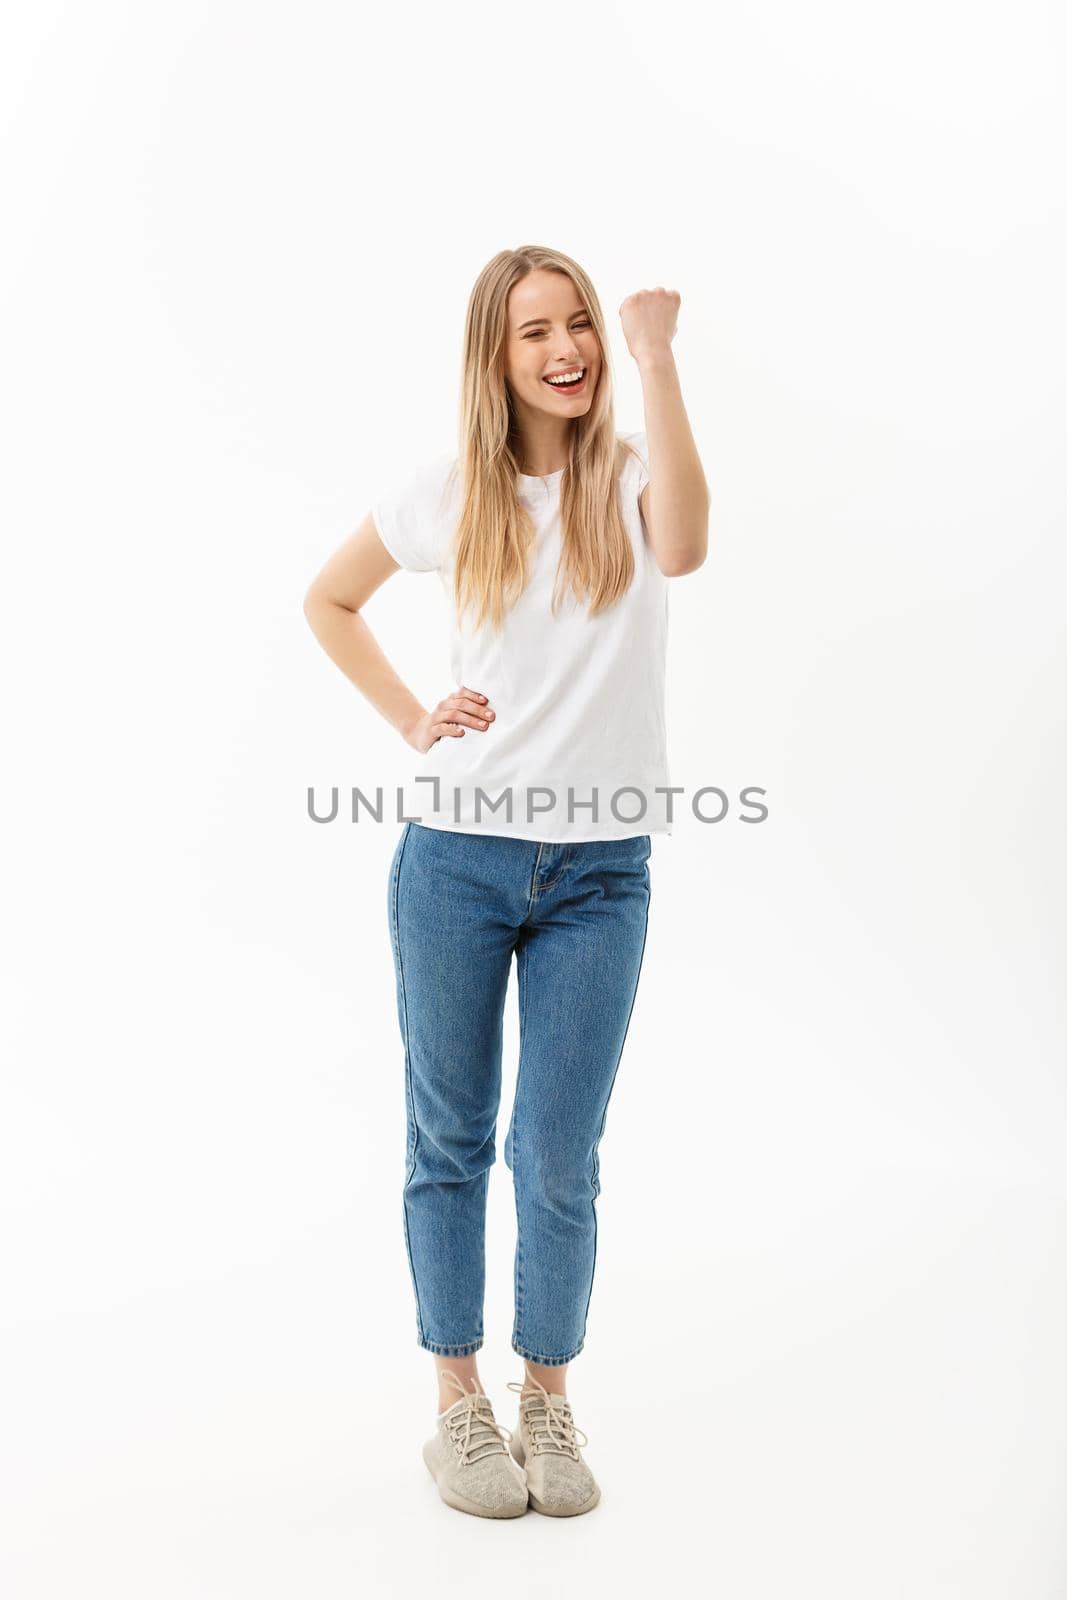 Full-length Portrait of a cheerful woman in white shirt and jean celebrating her success over white background.